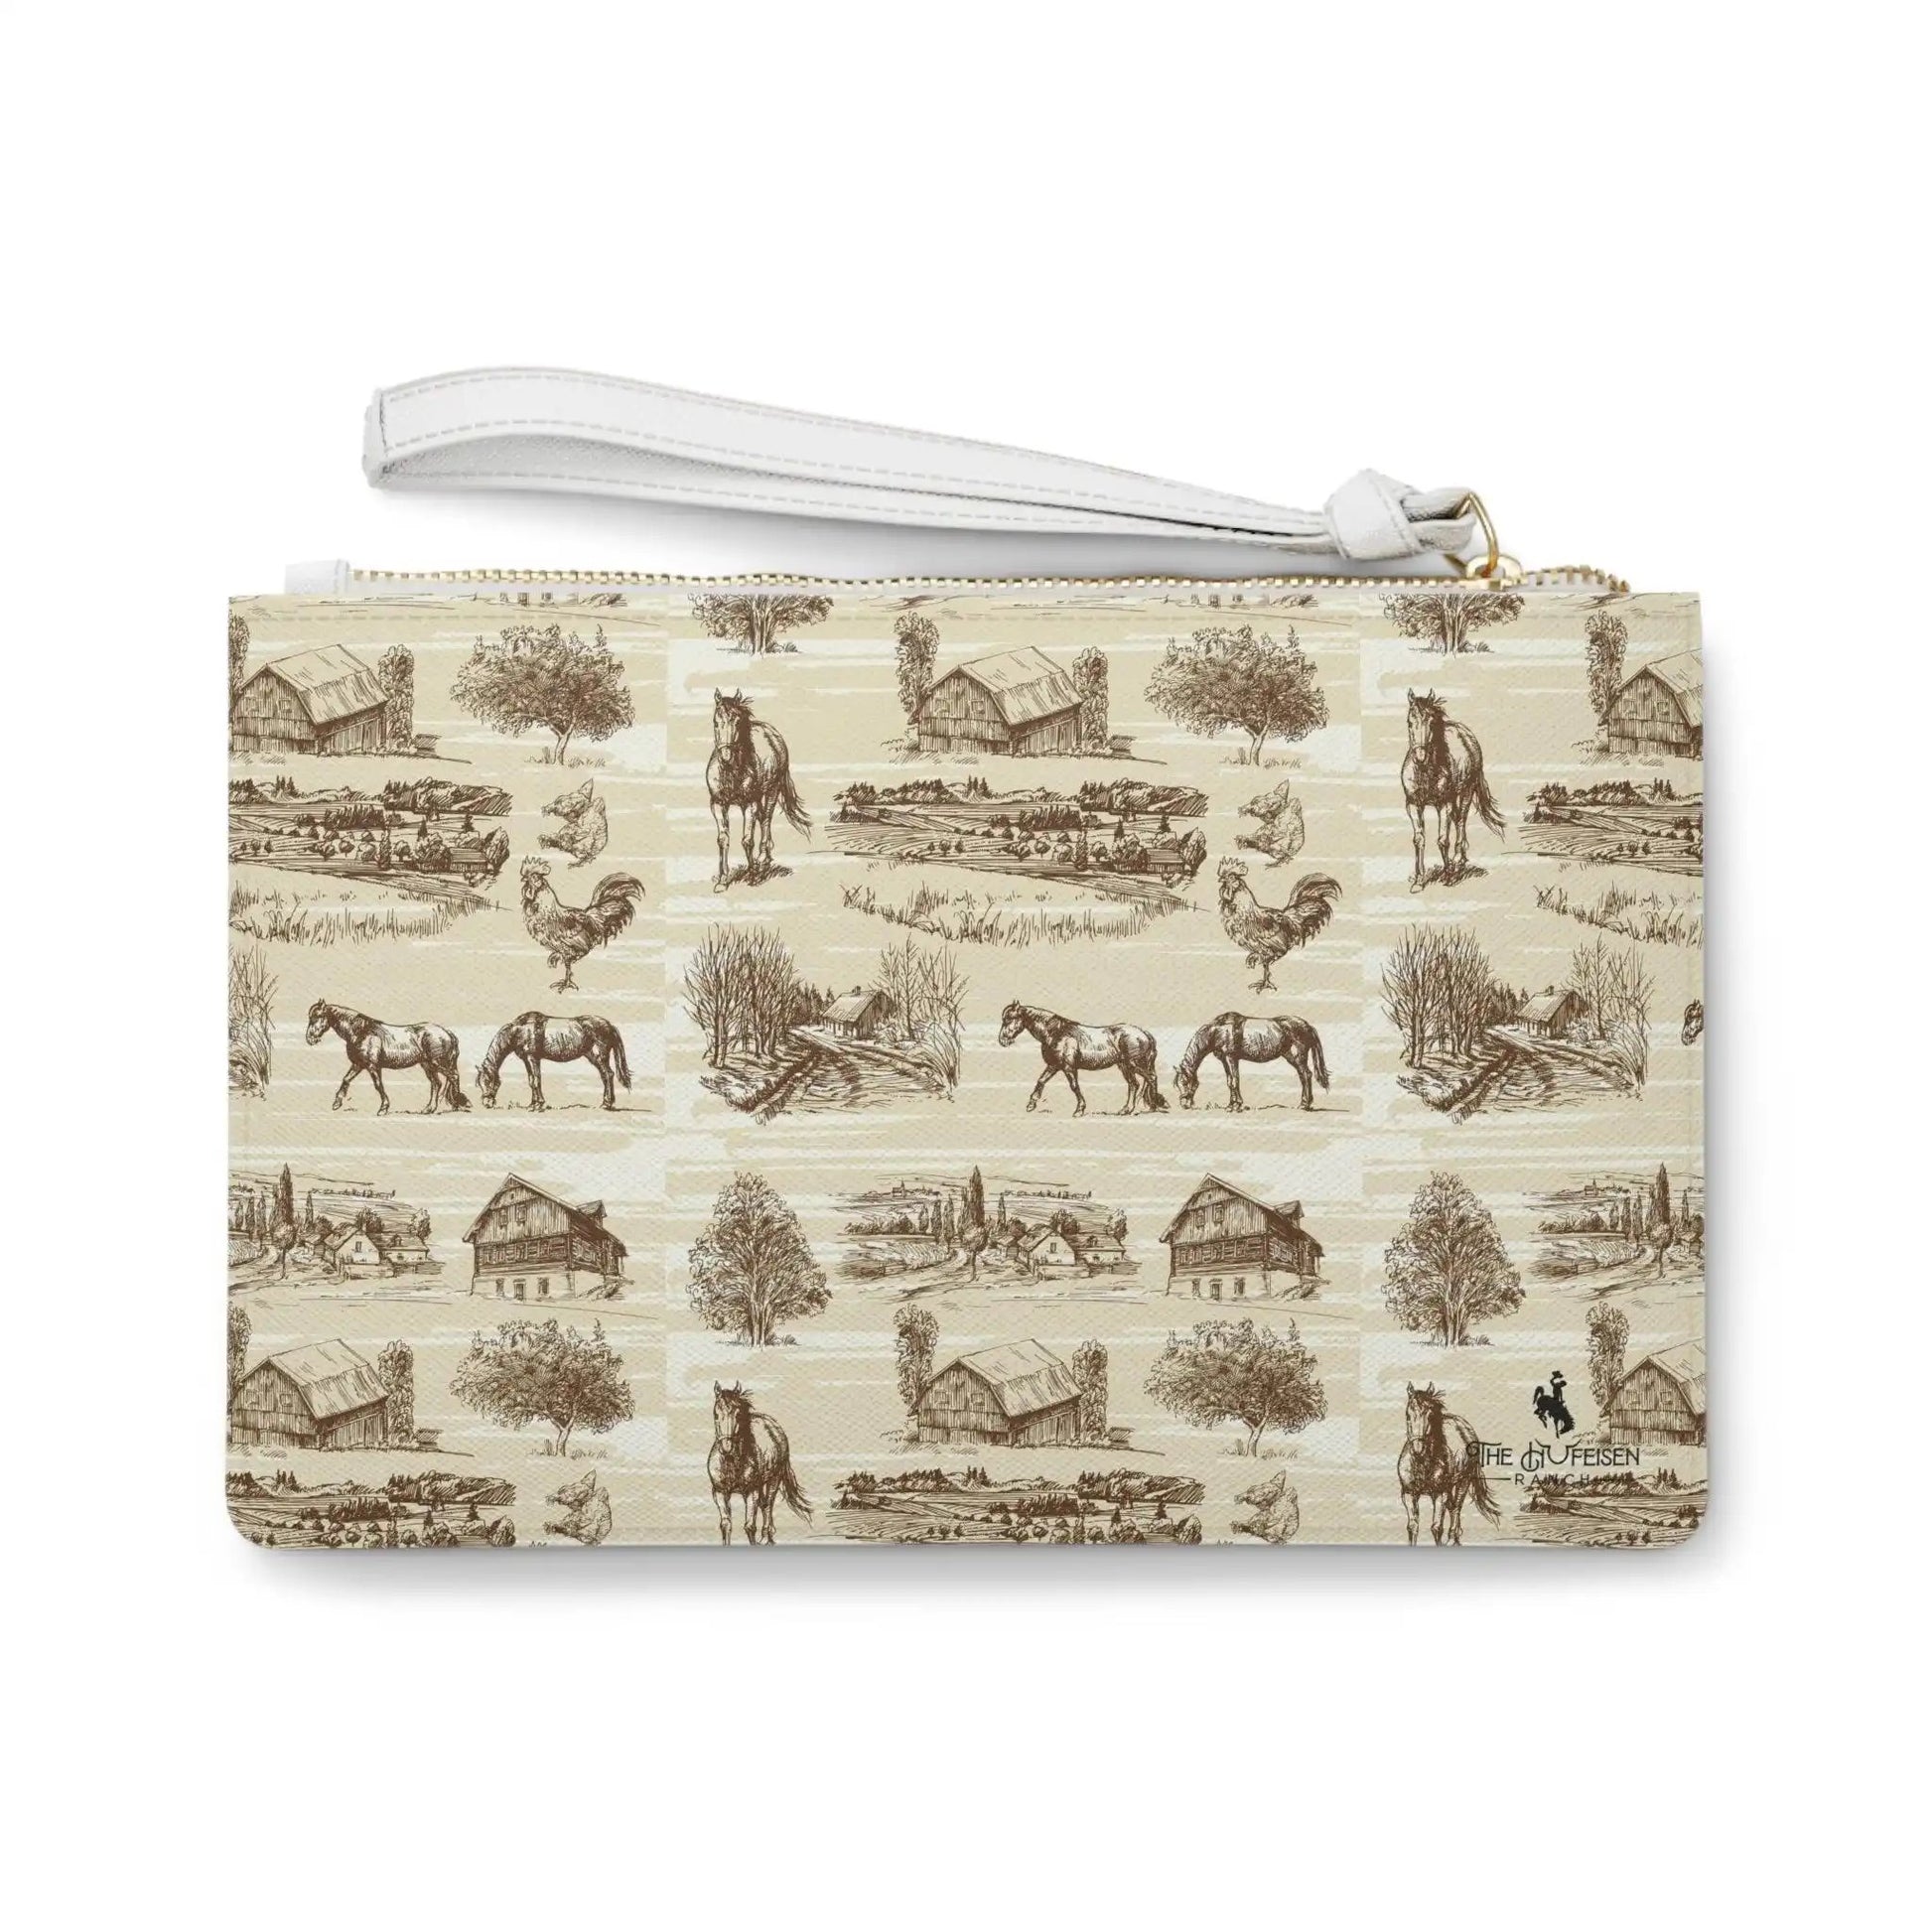 Country Farm Clutch BagDesigned with a loop handle to quickly free your hands, this custom clutch bag is made for the fashionista on the go. It can hold everyday essentials such as a phoneCountry Farm Clutch BagThe Hufeisen-Ranch (WYO Wagyu)Bags